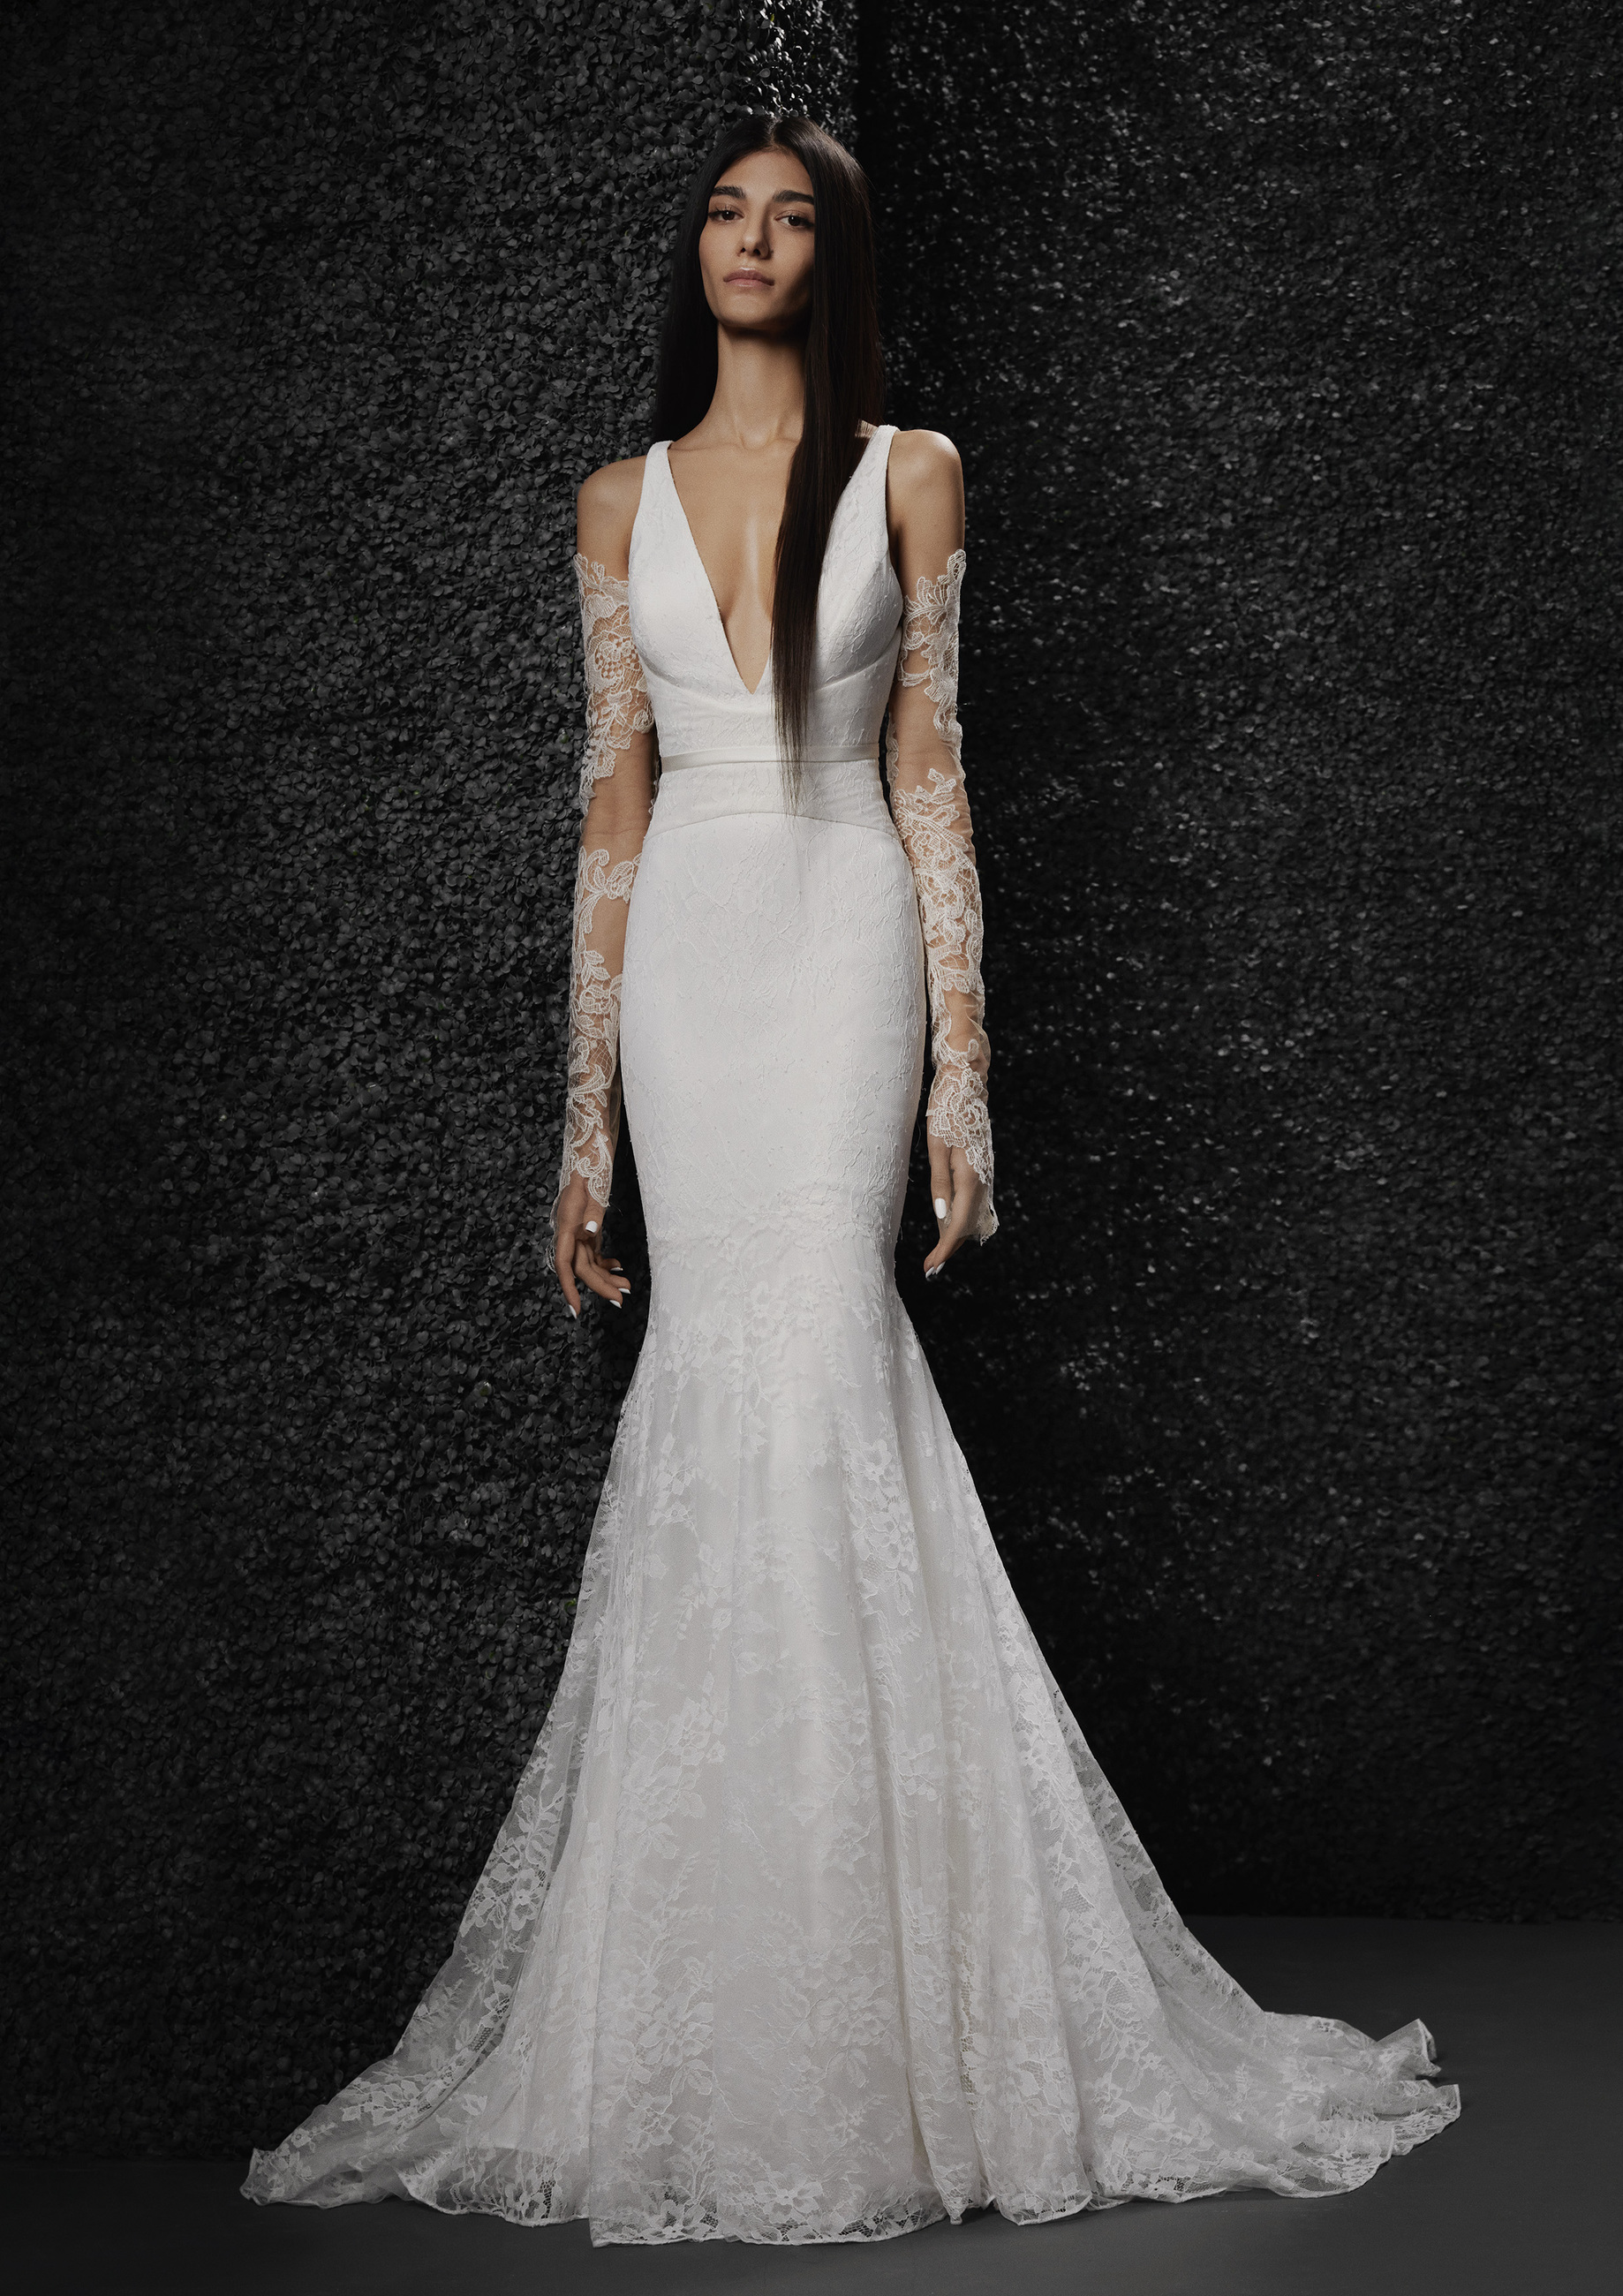 Photo of Model wearing a Vera Wang bridal gown